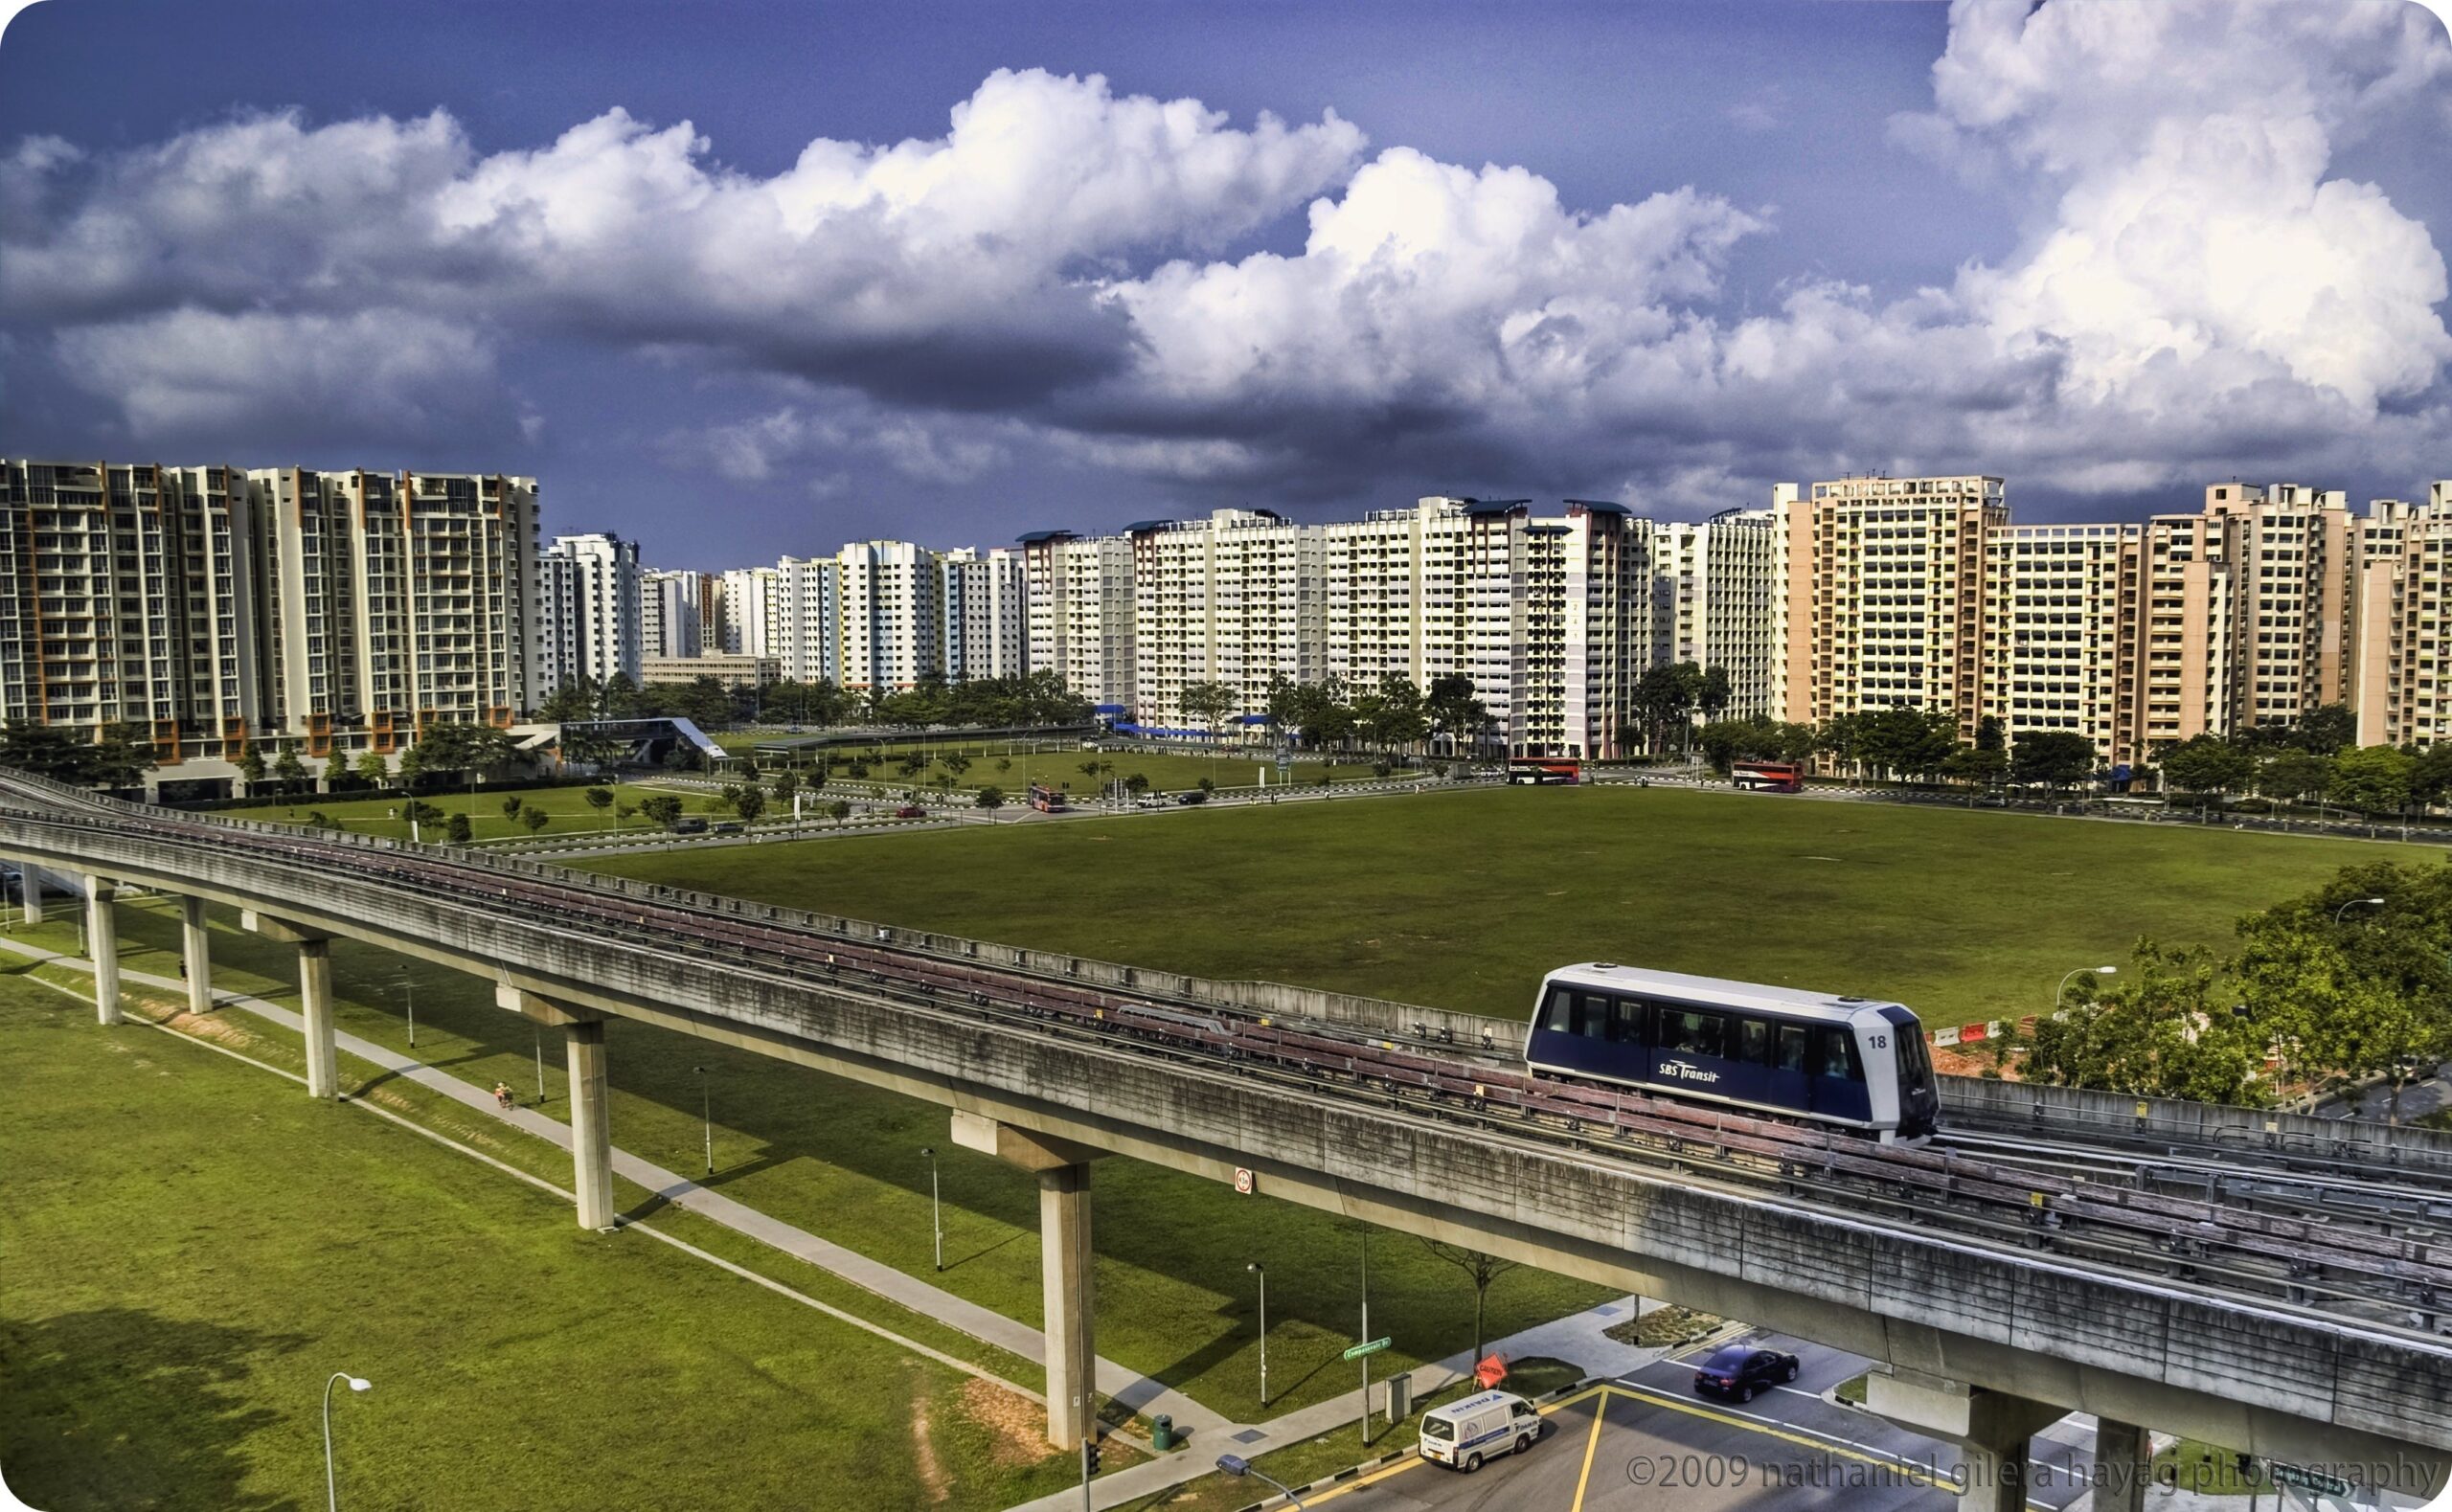 A snapshot of the Sengkang LRT and tracks by a large patch of grass